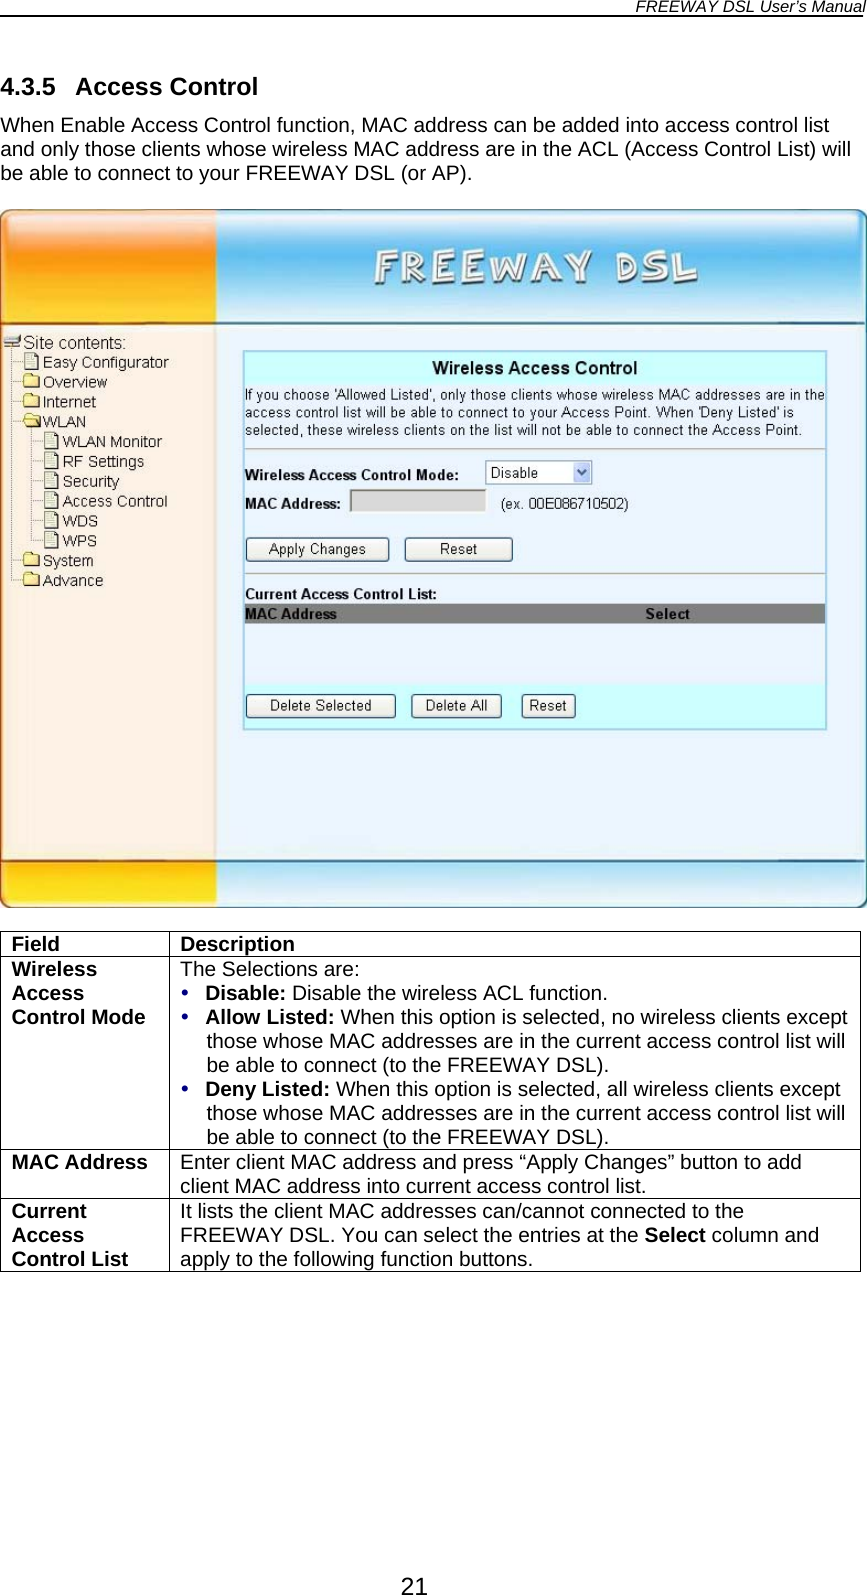 FREEWAY DSL User’s Manual  4.3.5 Access Control When Enable Access Control function, MAC address can be added into access control list and only those clients whose wireless MAC address are in the ACL (Access Control List) will be able to connect to your FREEWAY DSL (or AP).    Field Description Wireless Access Control Mode The Selections are:  Disable: Disable the wireless ACL function.  Allow Listed: When this option is selected, no wireless clients except those whose MAC addresses are in the current access control list will be able to connect (to the FREEWAY DSL).  Deny Listed: When this option is selected, all wireless clients except those whose MAC addresses are in the current access control list will be able to connect (to the FREEWAY DSL). MAC Address  Enter client MAC address and press “Apply Changes” button to add client MAC address into current access control list. Current Access Control List It lists the client MAC addresses can/cannot connected to the FREEWAY DSL. You can select the entries at the Select column and apply to the following function buttons.  21 